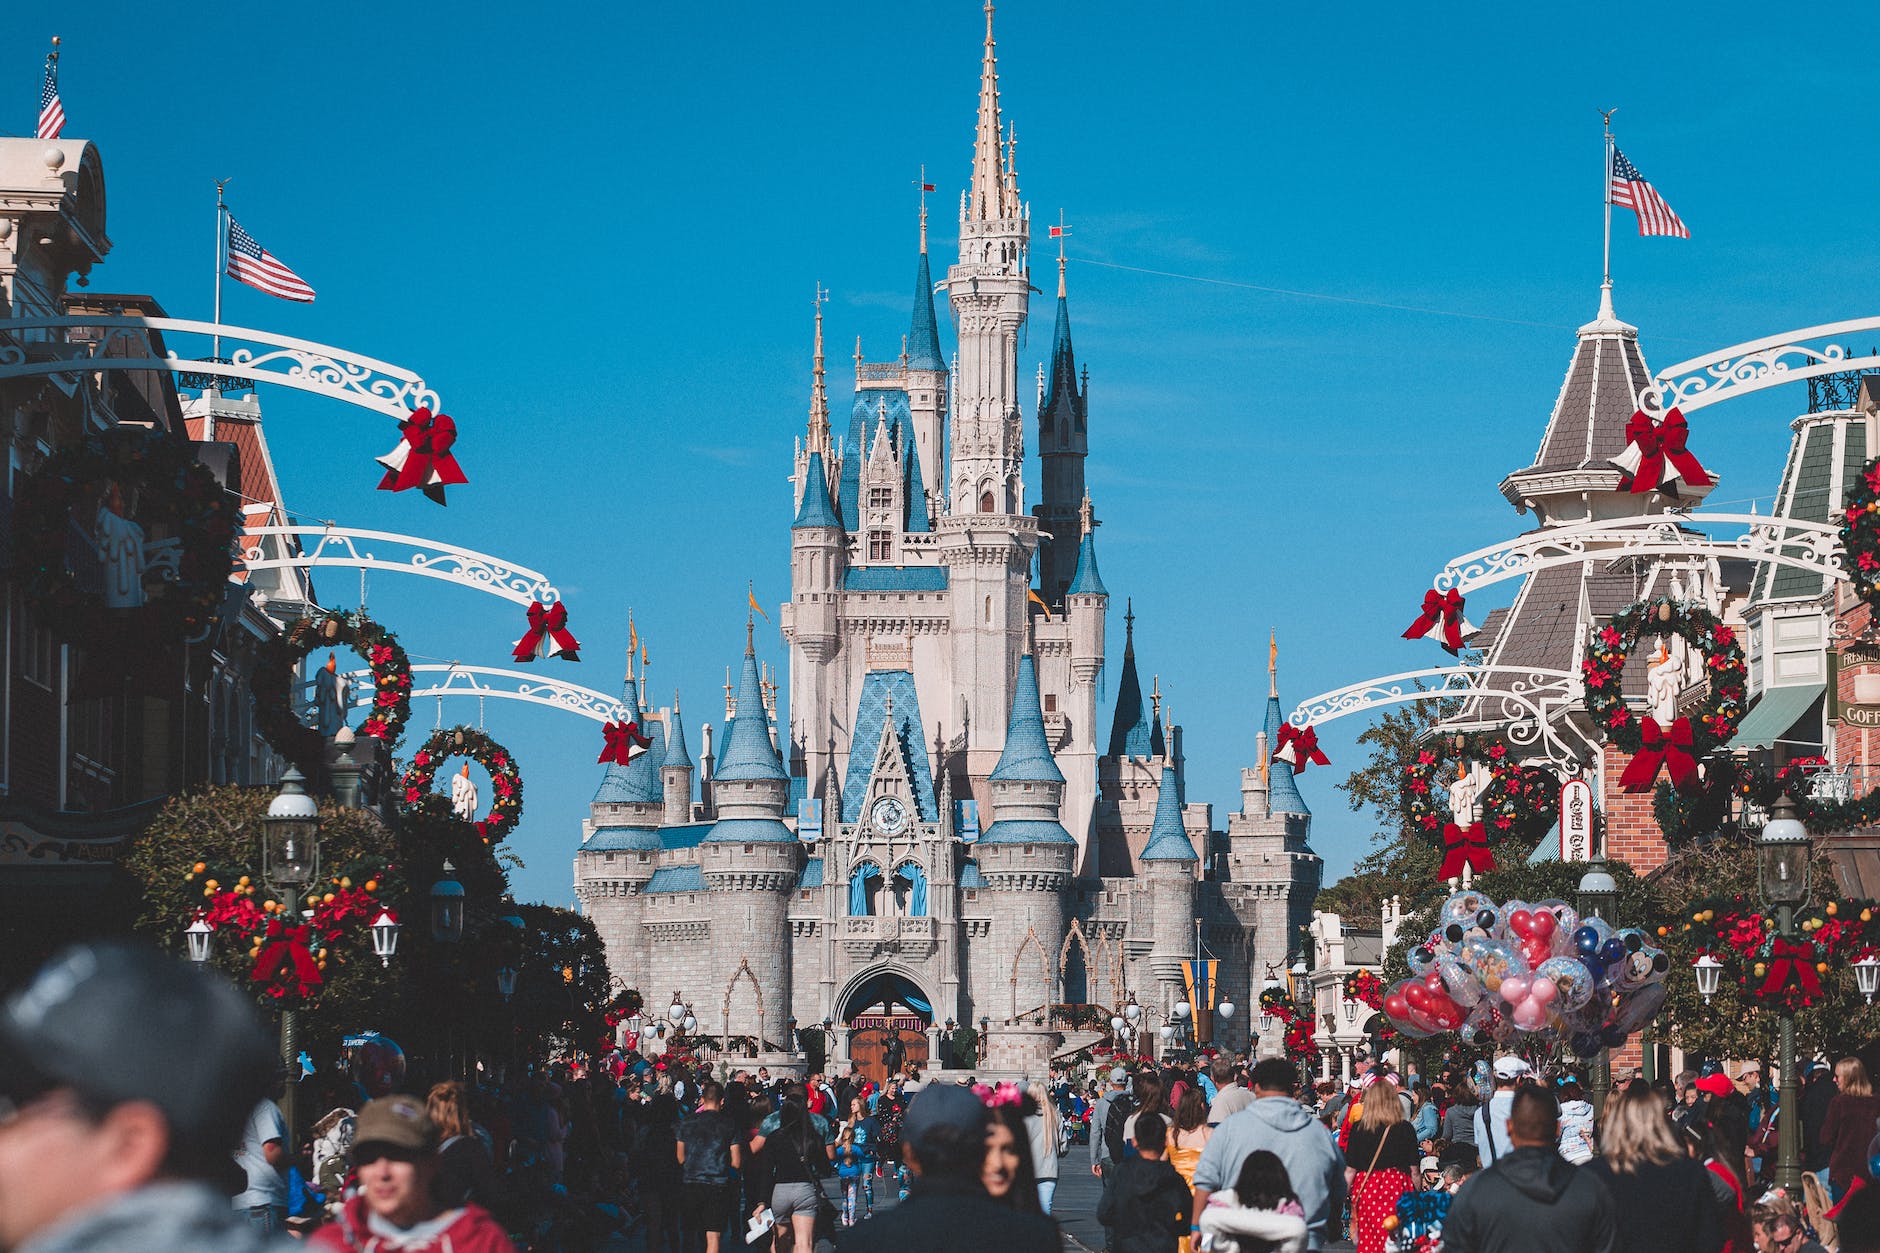 Disney World for Adults in One Day- An Easy Guide to Fun - Sand and Snow